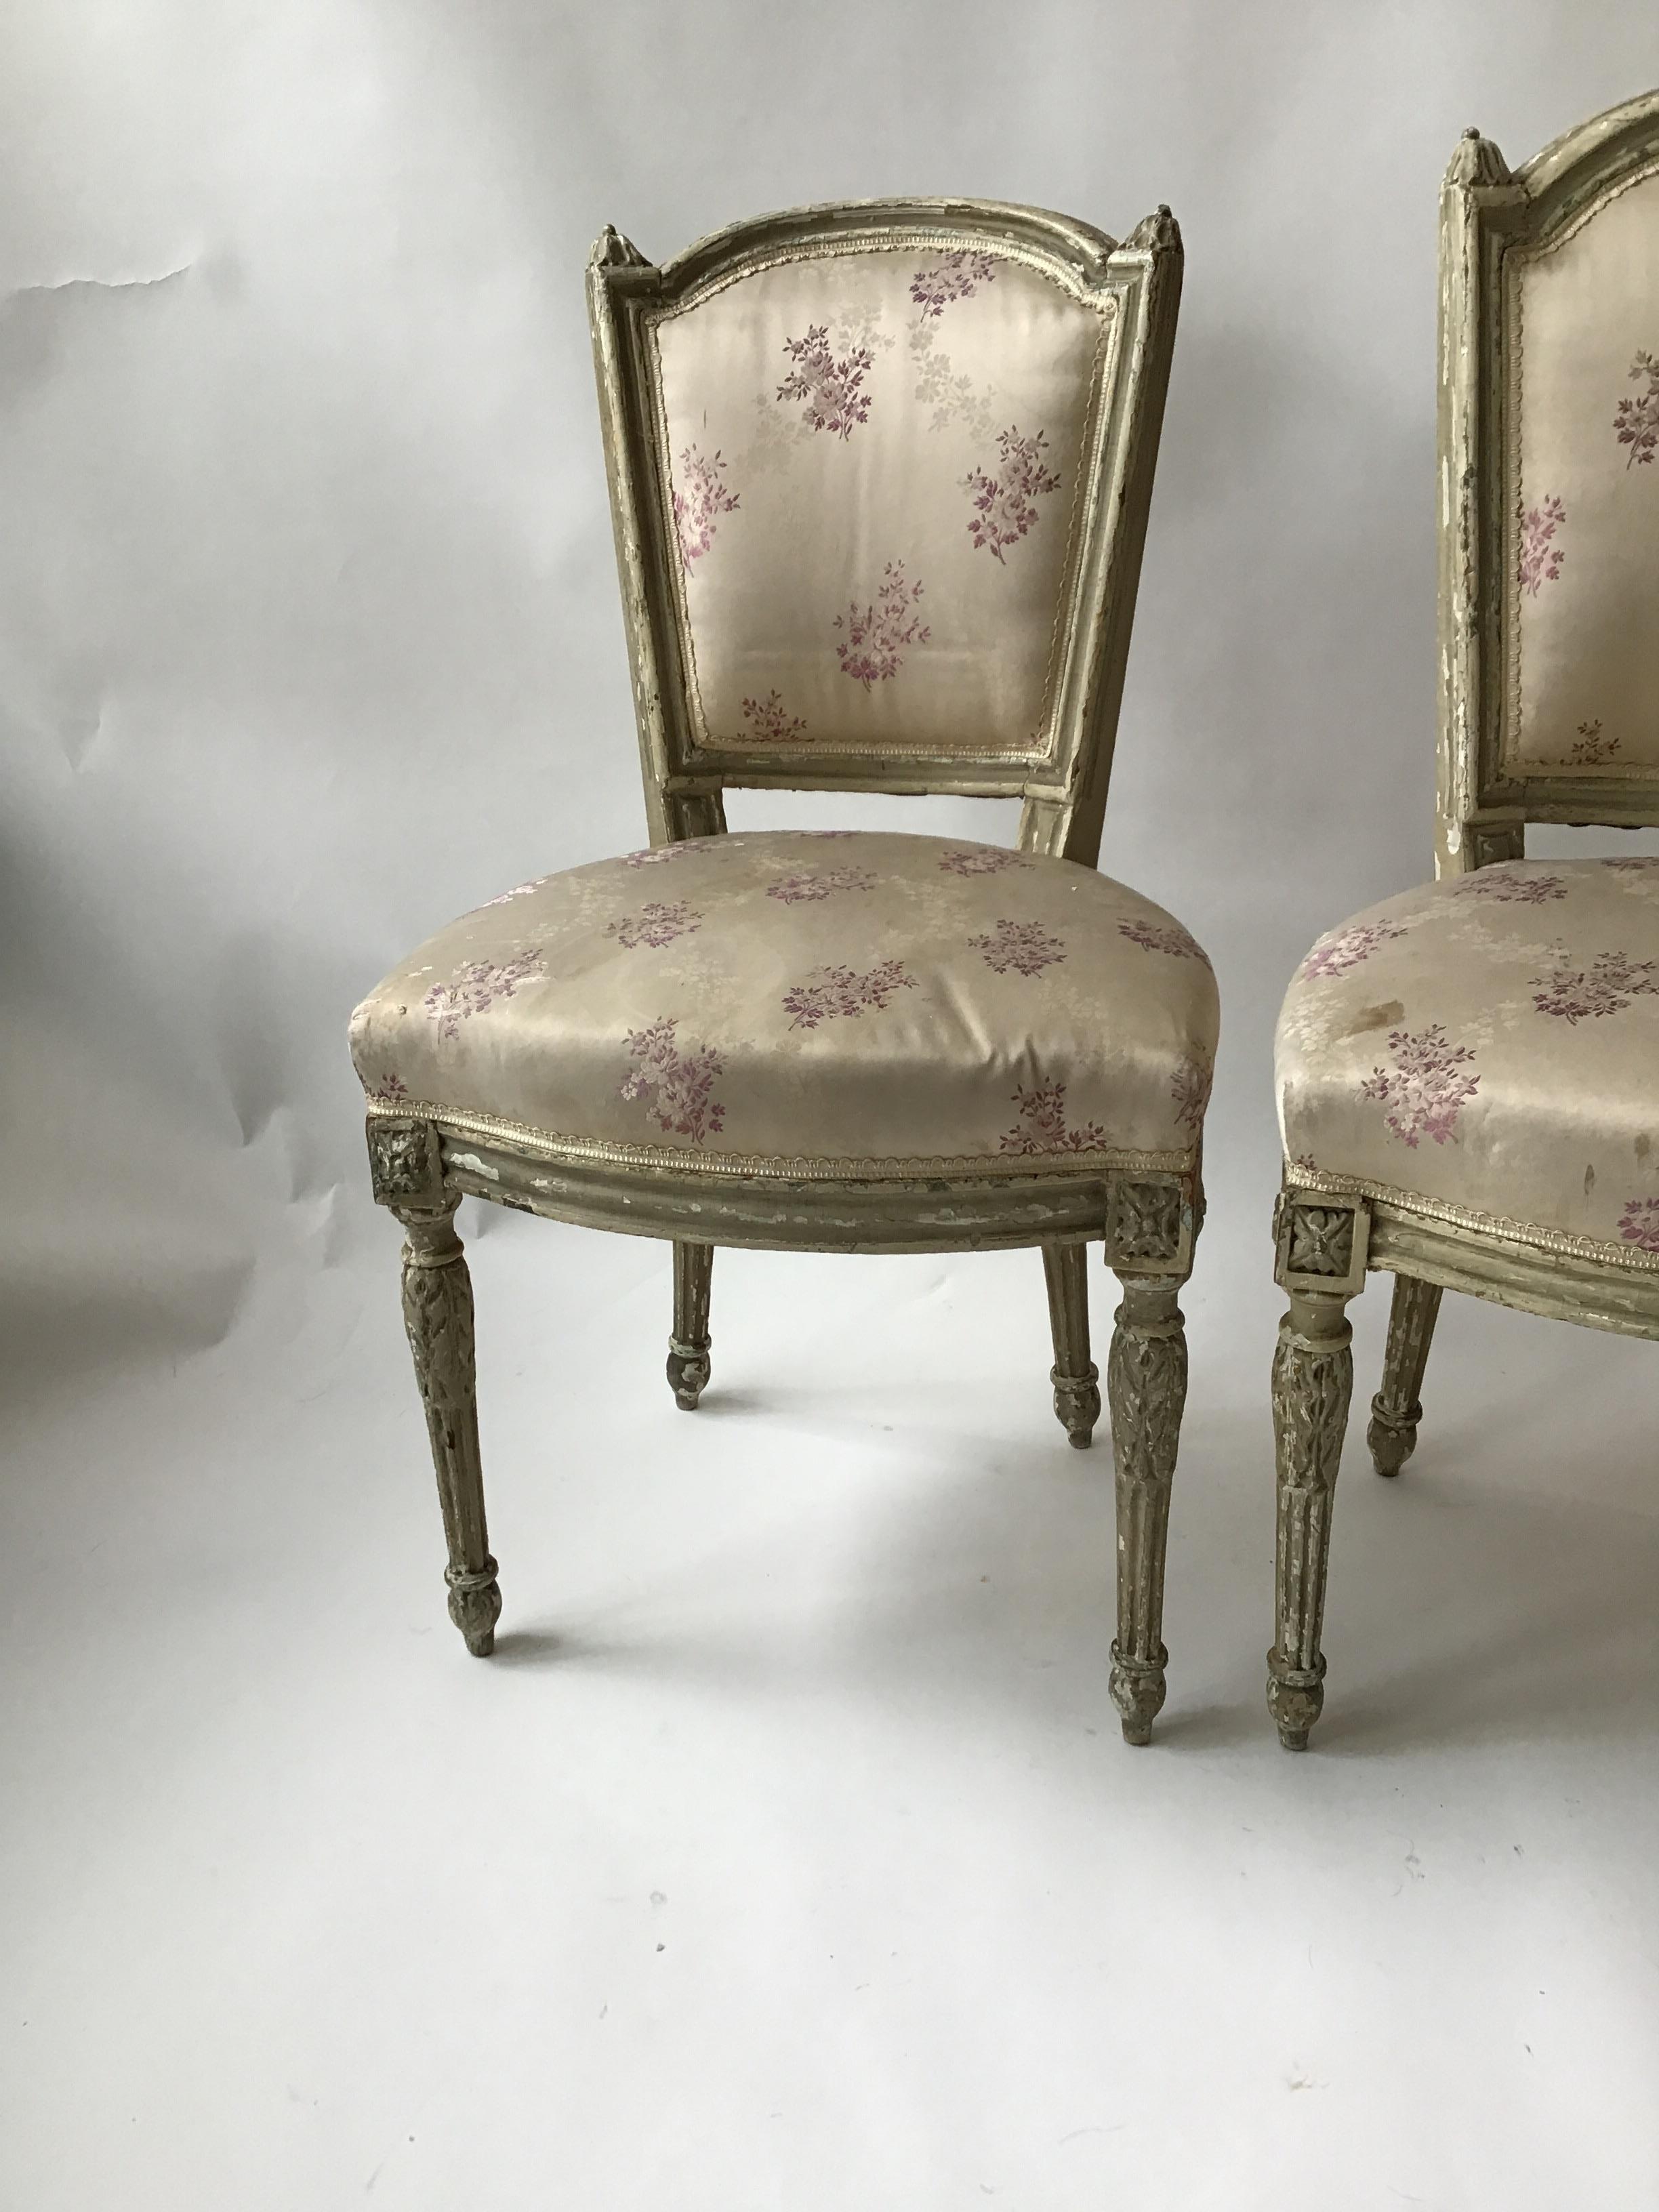 Pair of 1870s French Louis XVI side chairs. One chair is taller than the other. The taller one was for the man, the shorter, for the woman.